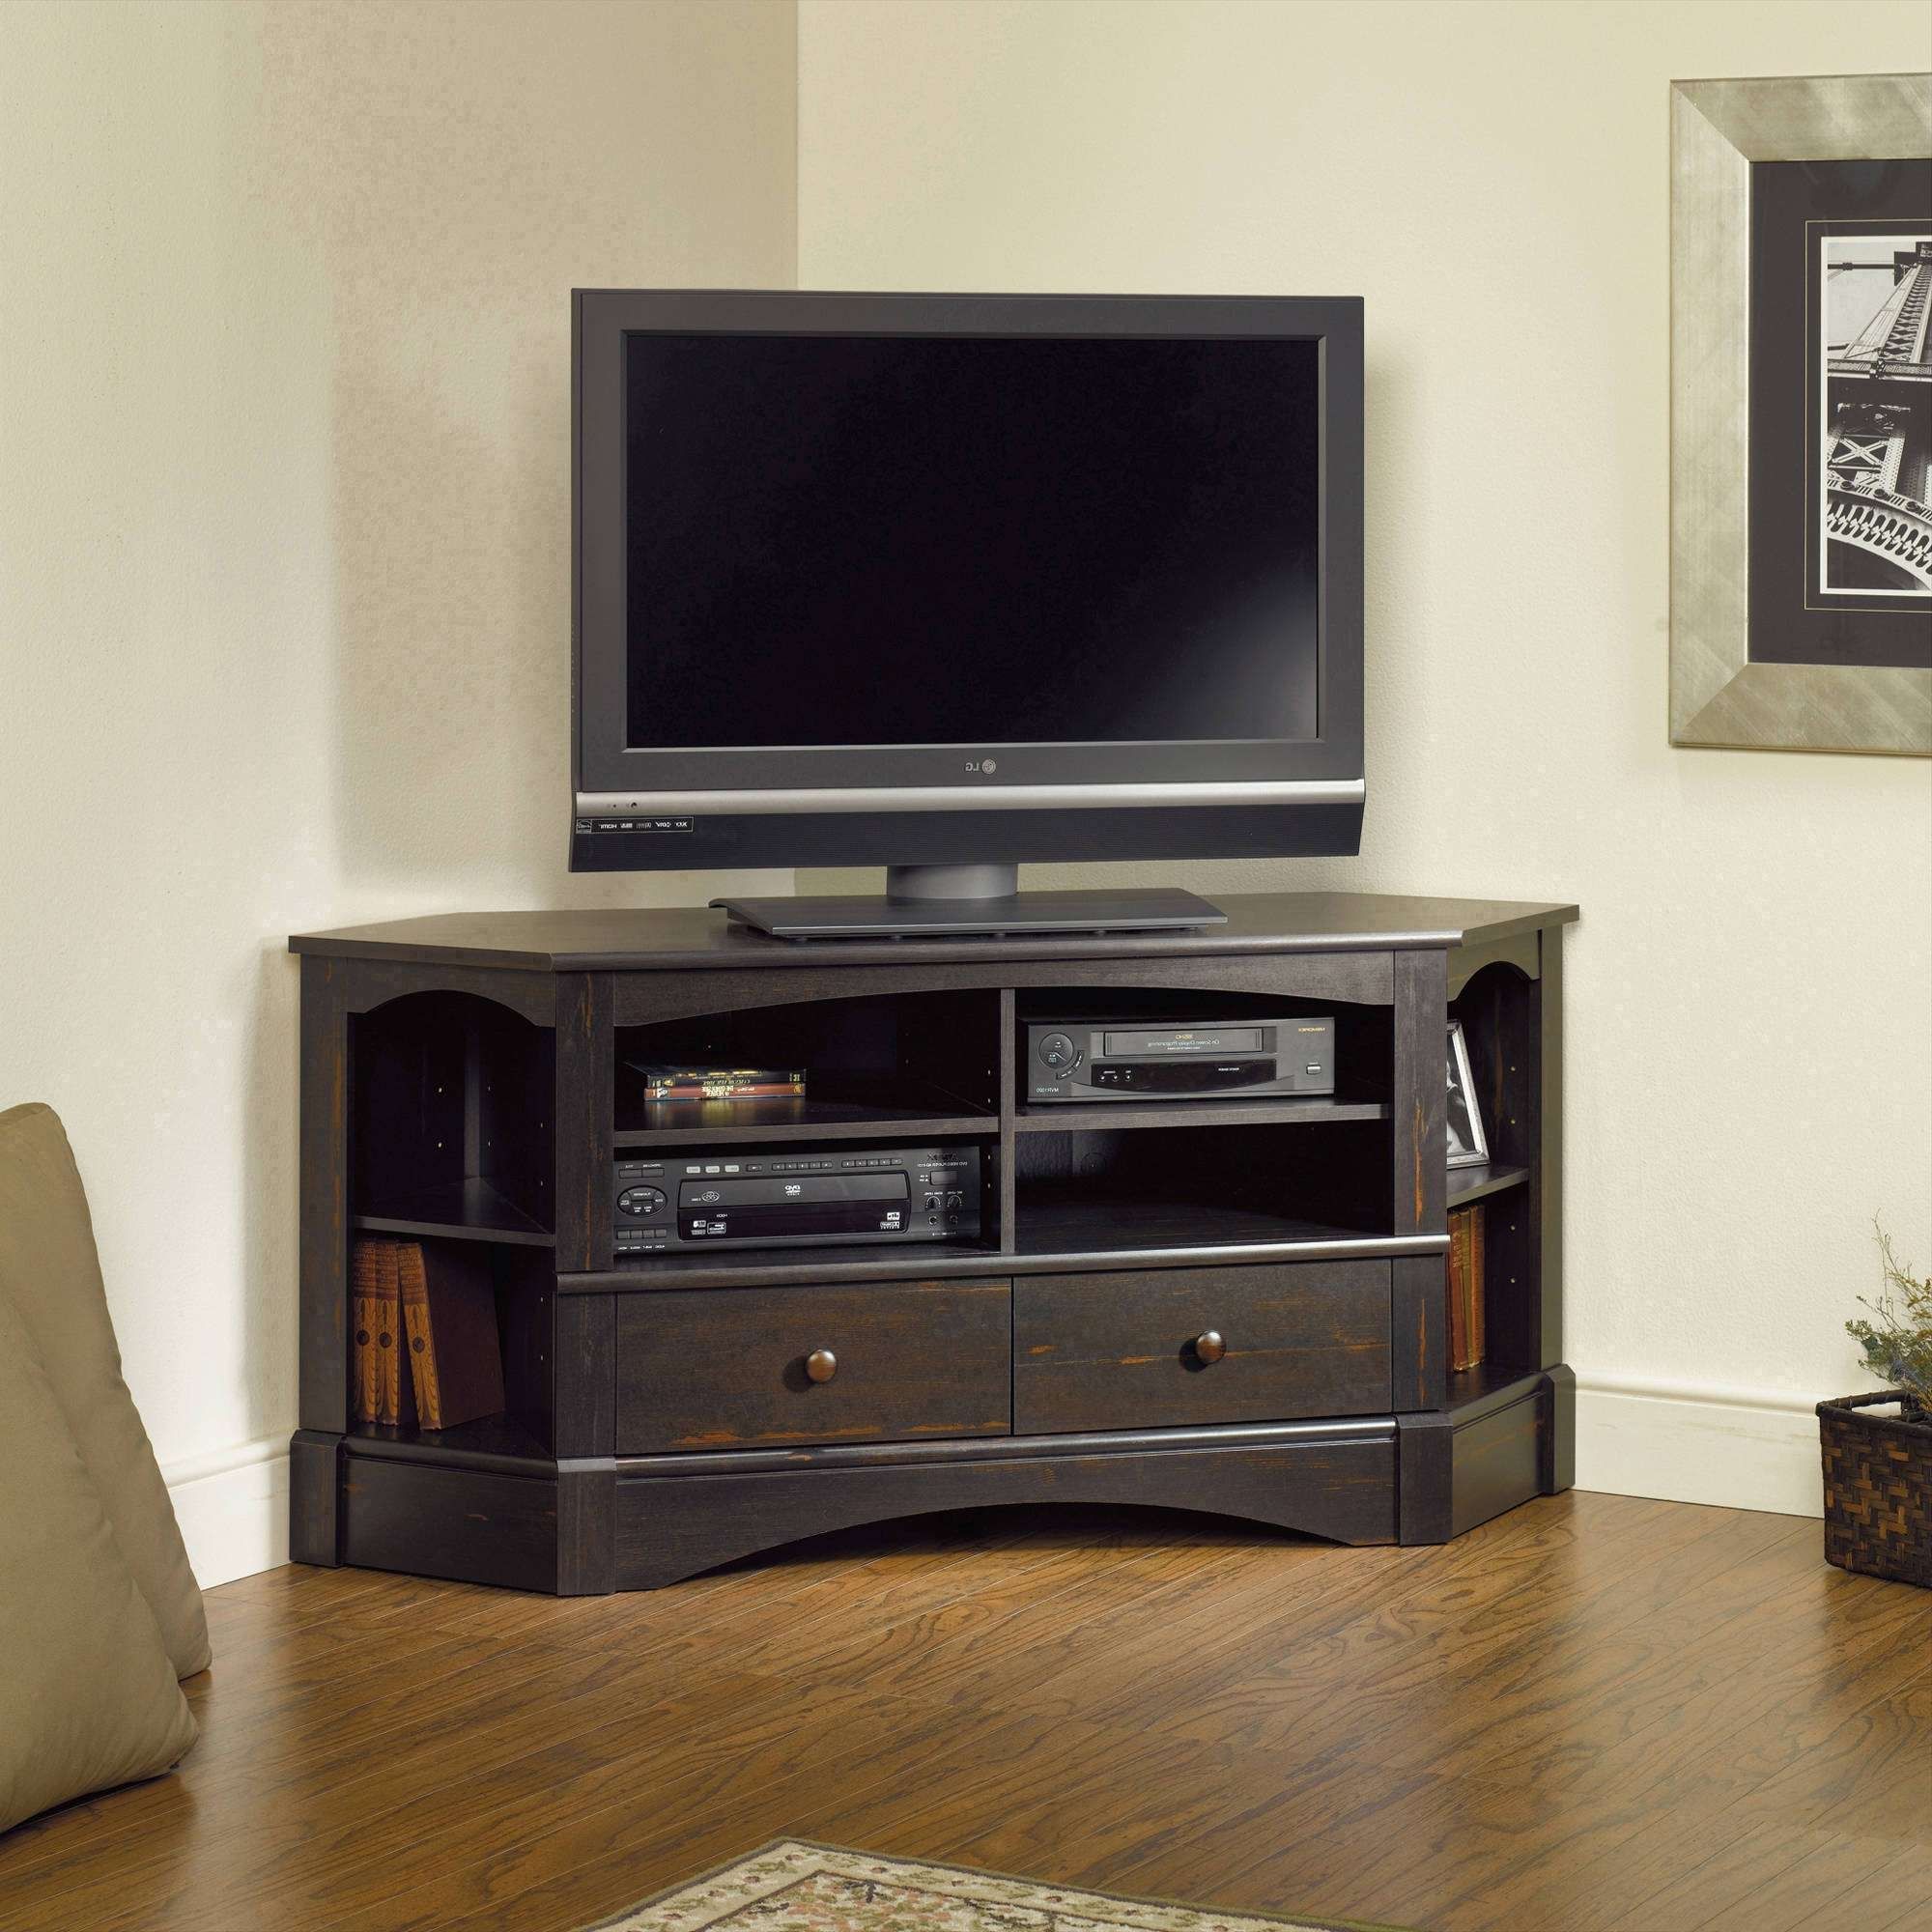 Sauder Harbor View Corner Entertainment Credenza For Tvs Up To 42 Pertaining To Corner Tv Stands For 46 Inch Flat Screen (View 1 of 15)